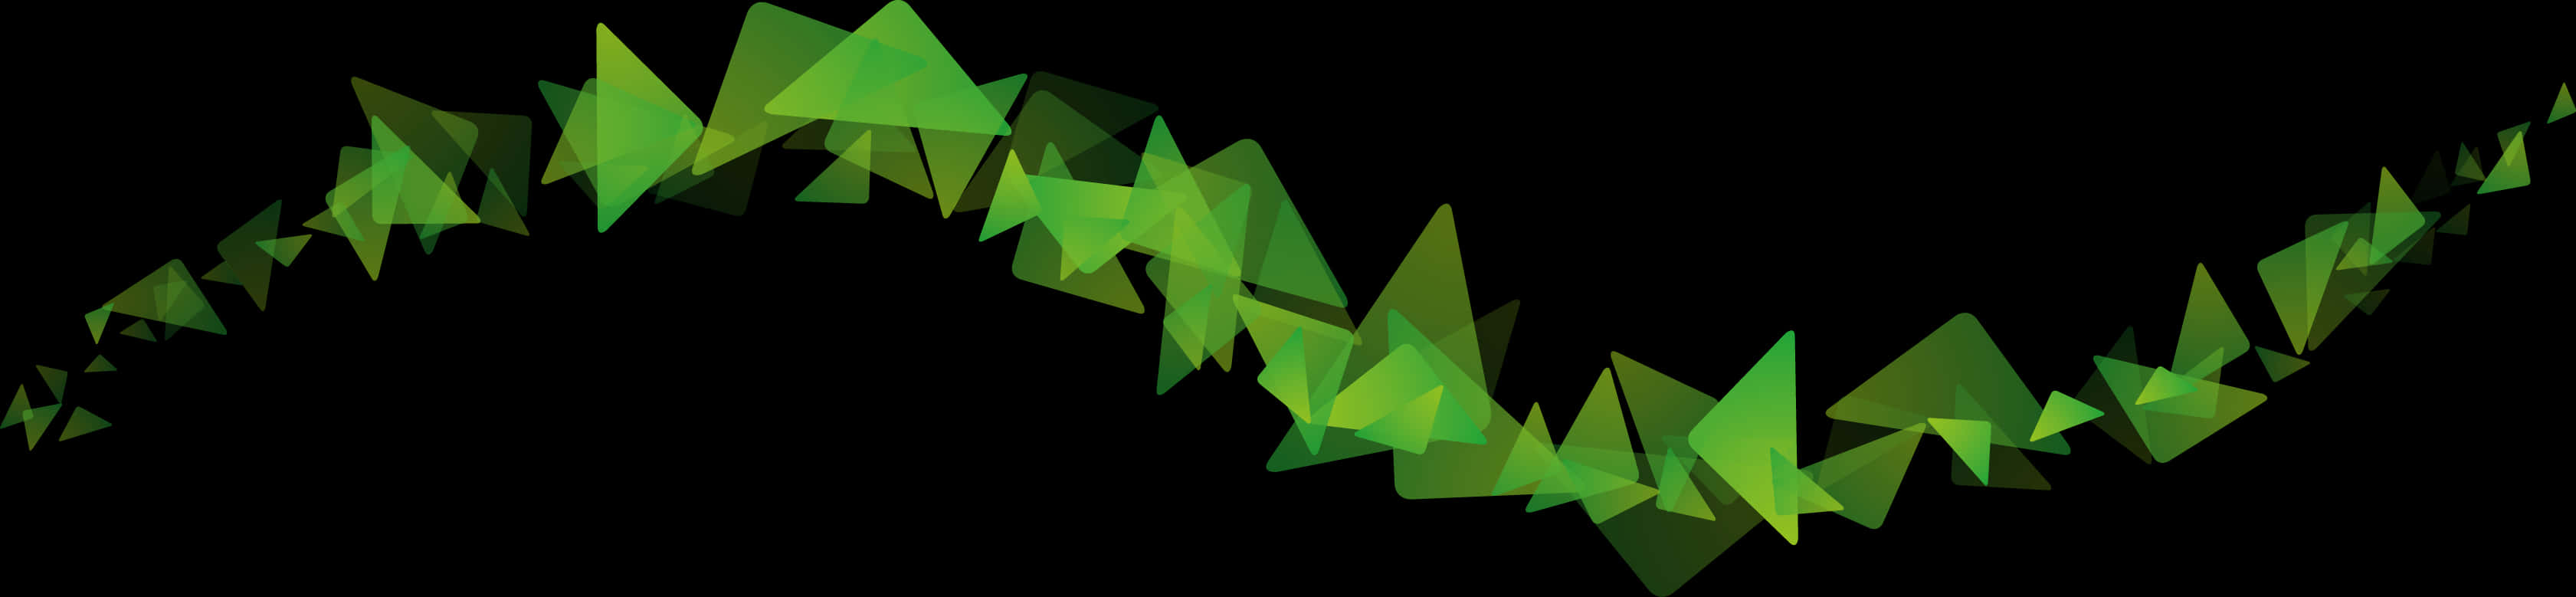 Abstract Green Triangle Wave PNG